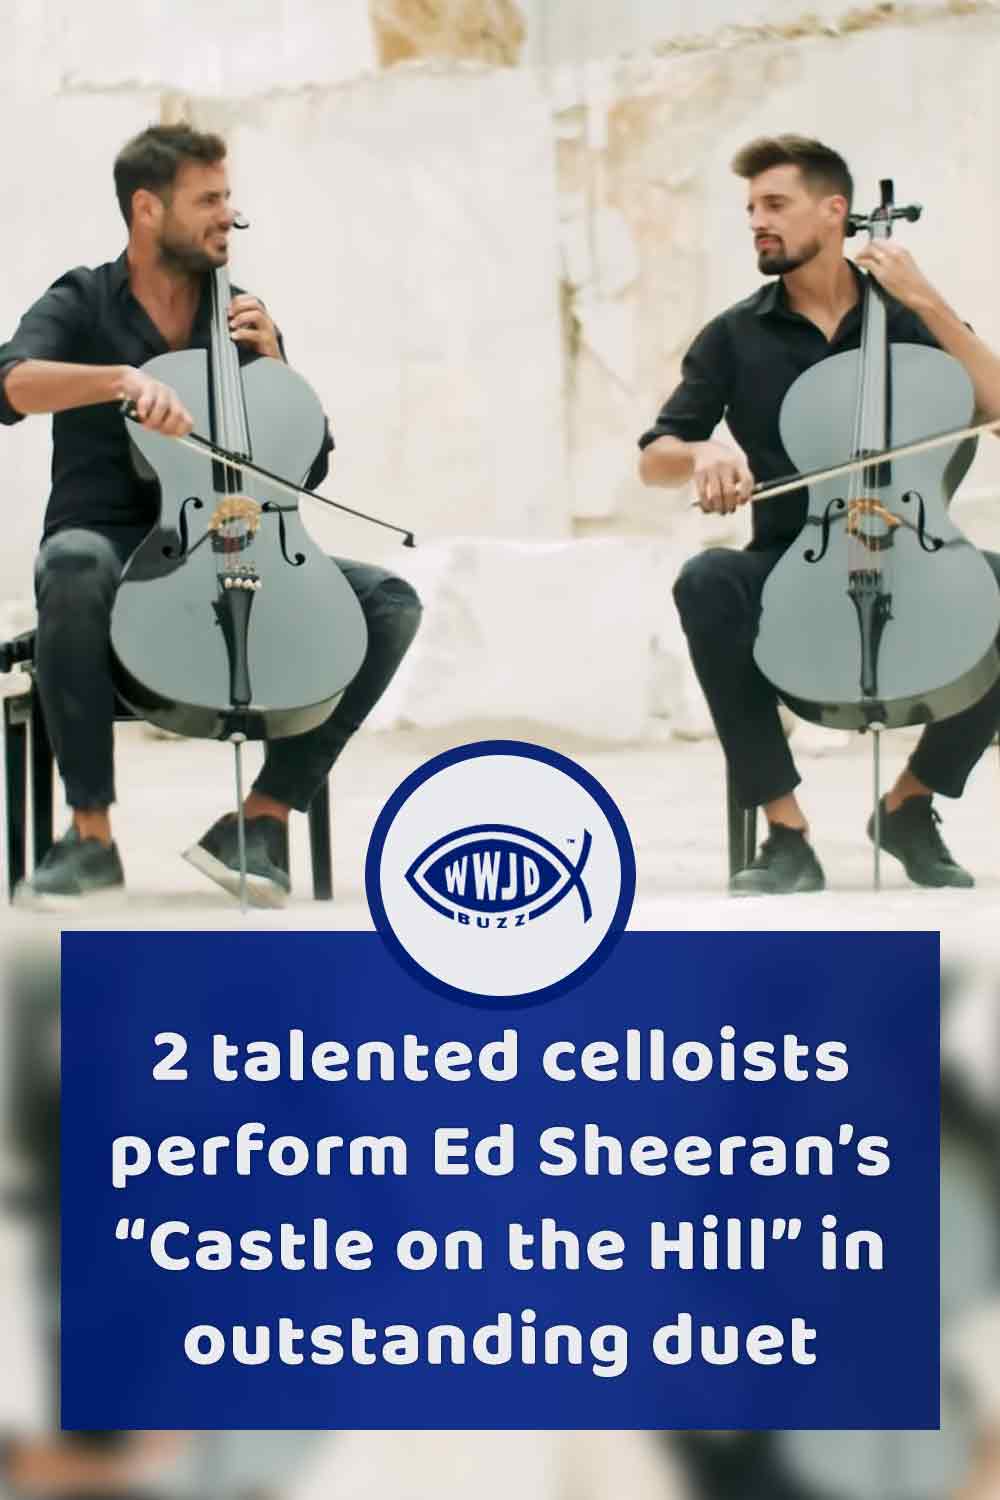 2 talented celloists perform Ed Sheeran’s “Castle on the Hill” in outstanding duet